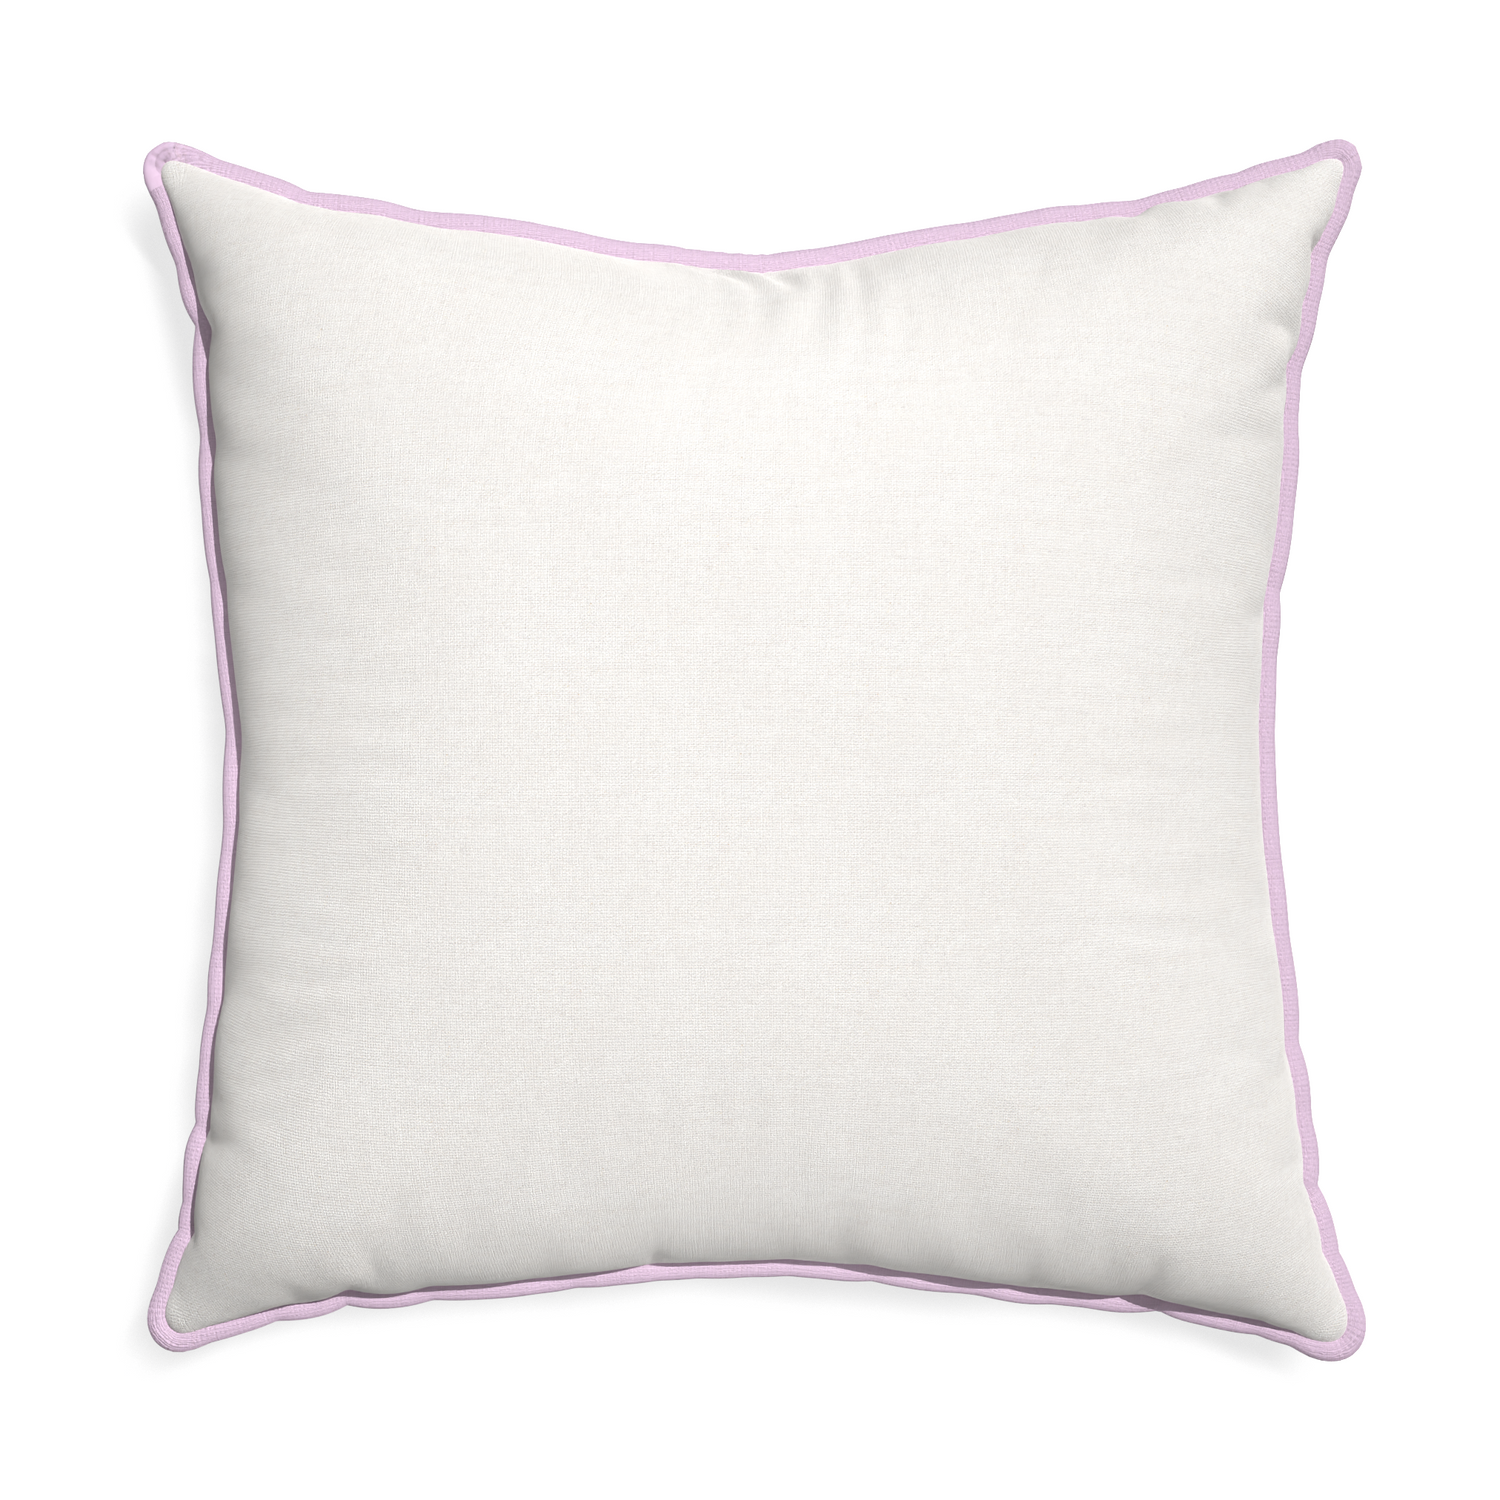 Euro-sham flour custom pillow with l piping on white background